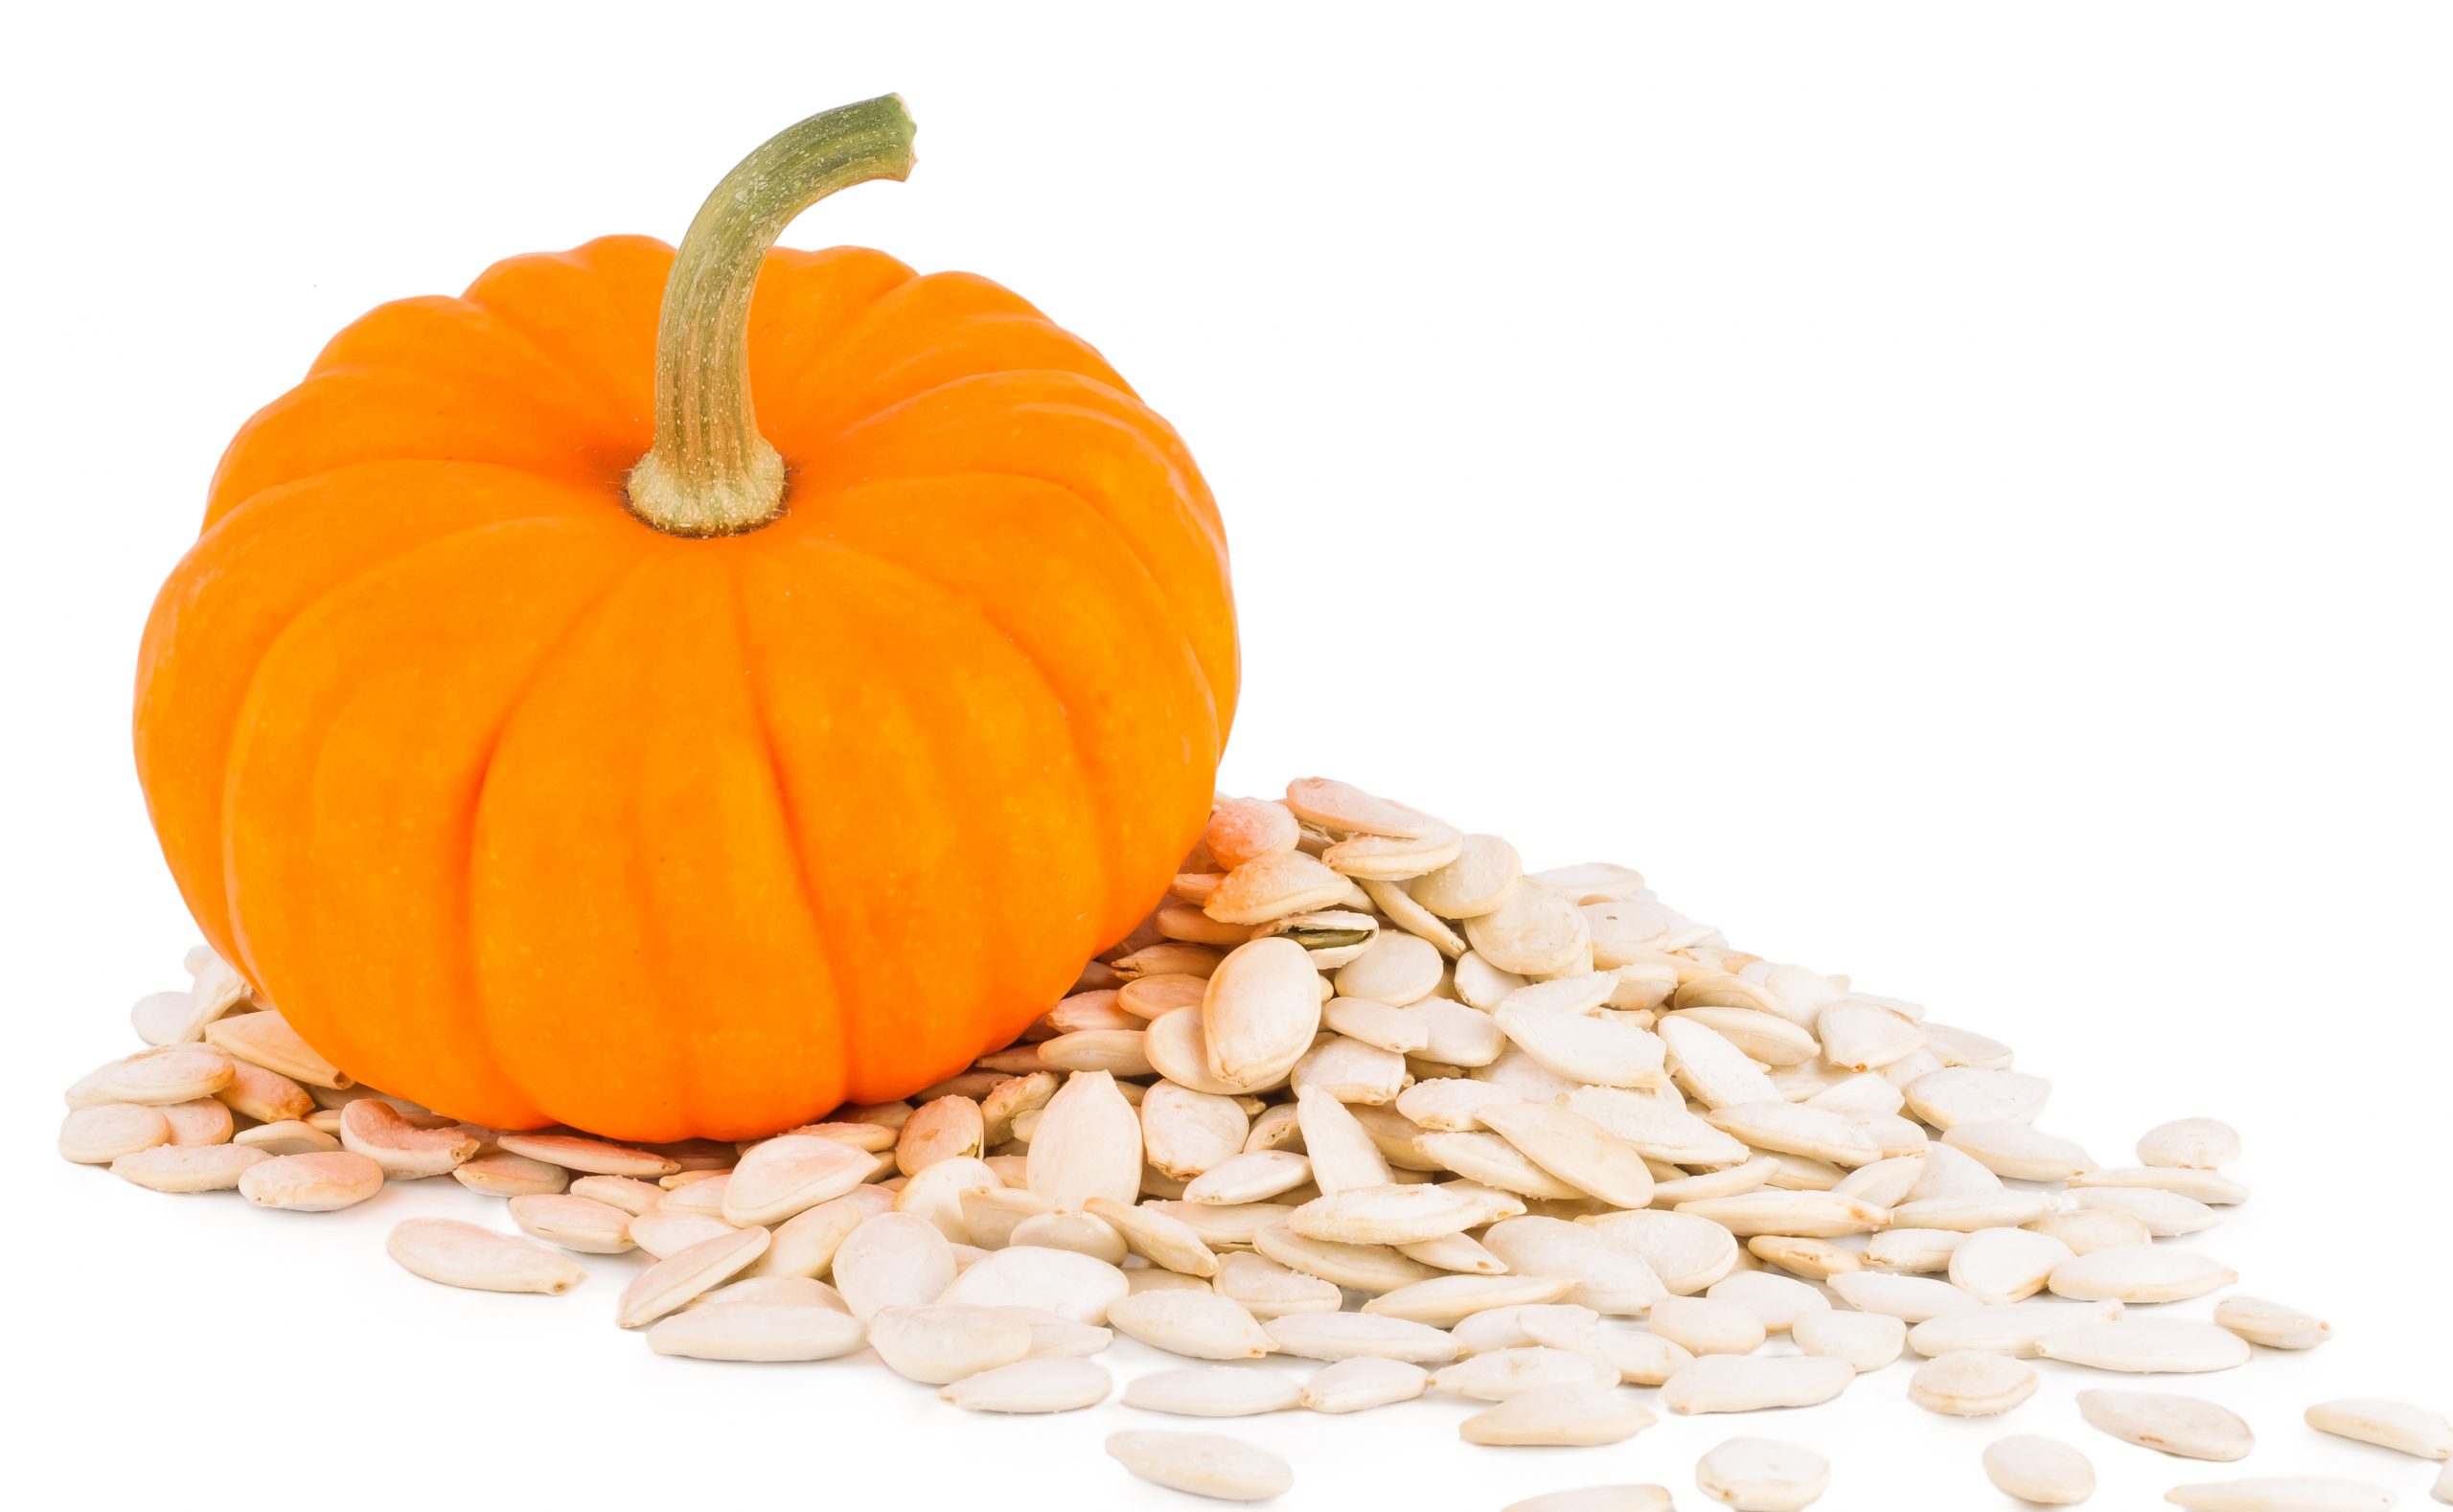 Scientists work to answer the question, will pumpkin seed oil help hair regrow